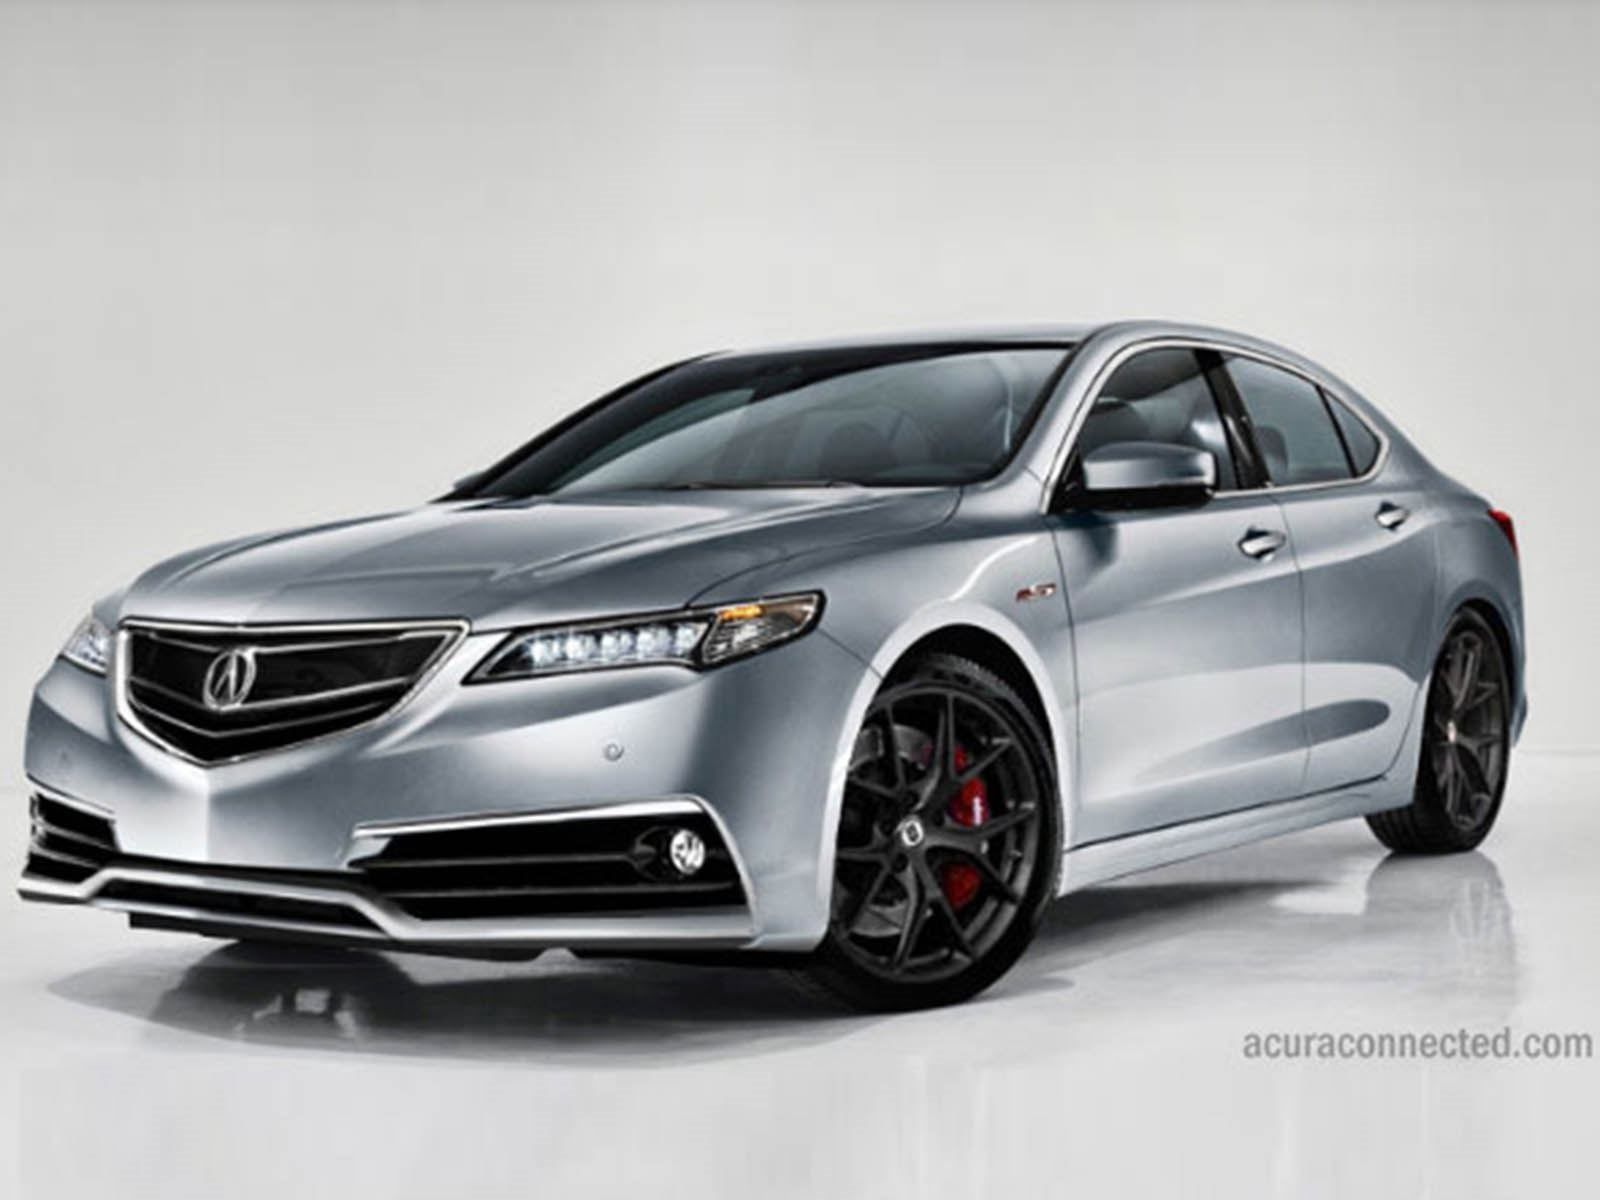 Improvements That Could Make The Acura TLX A Perfect Sport Sedan